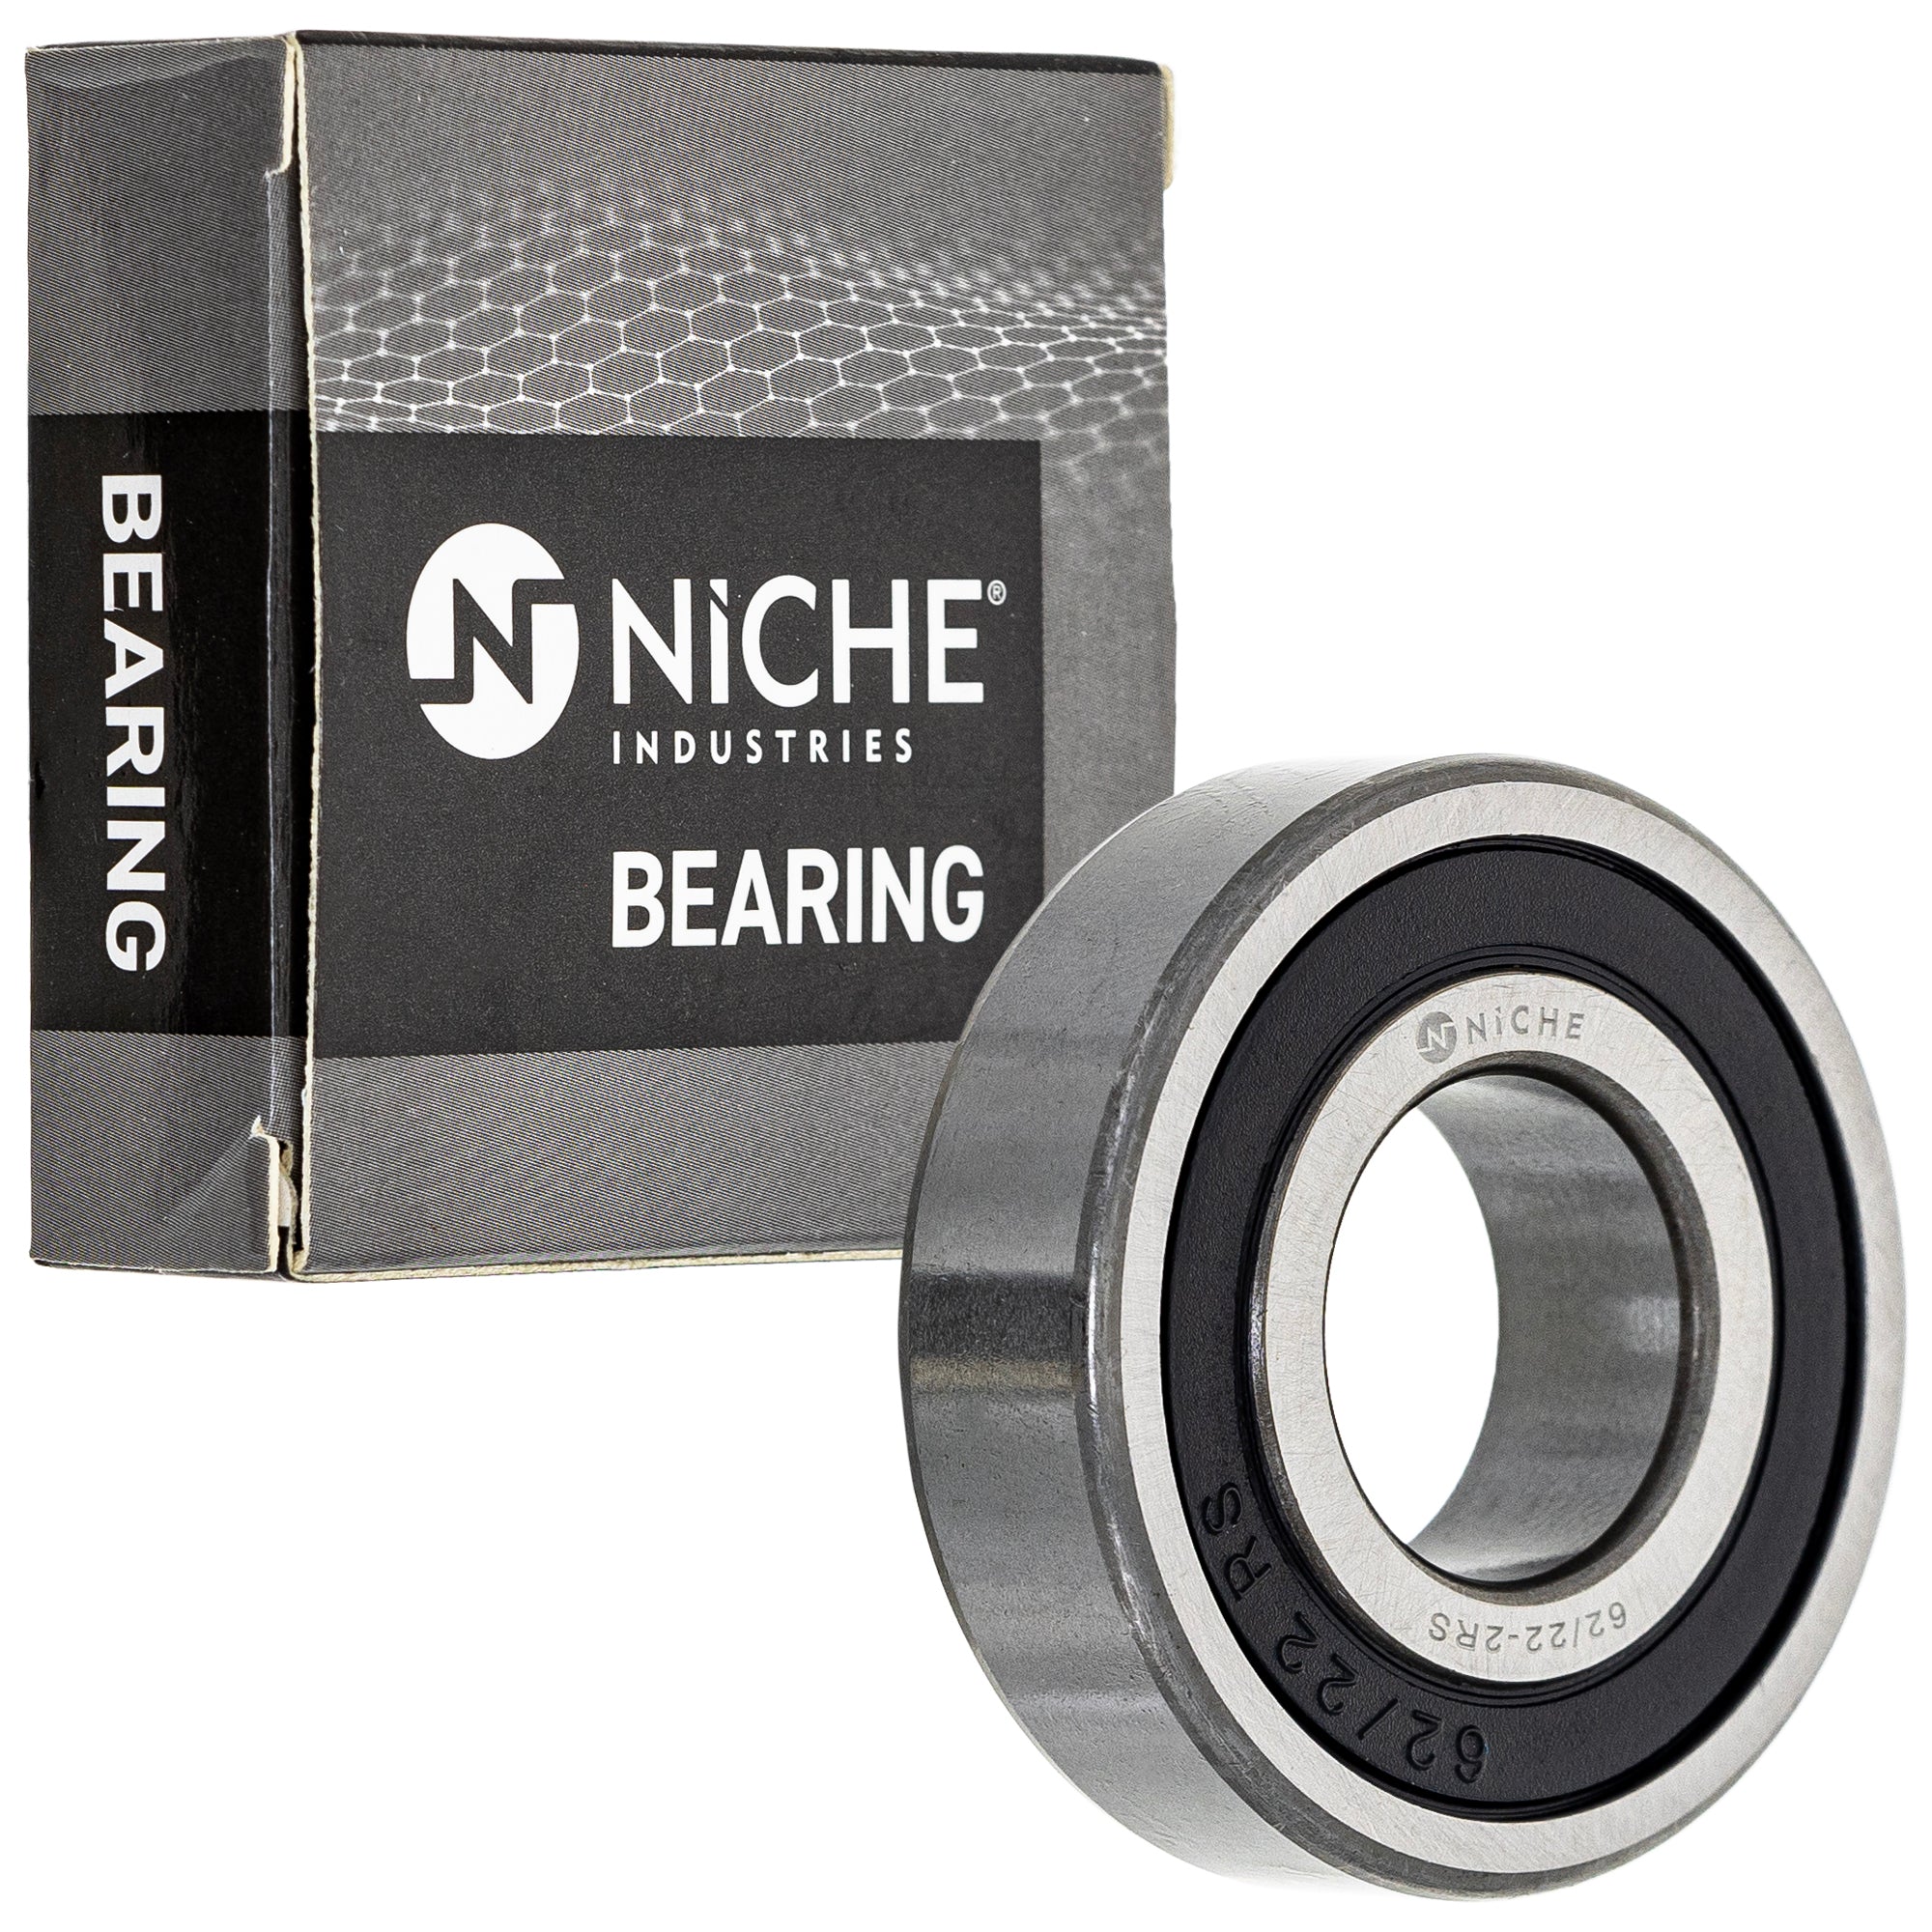 NICHE 519-CBB2271R Bearing 10-Pack for zOTHER Shadow CBR900RR